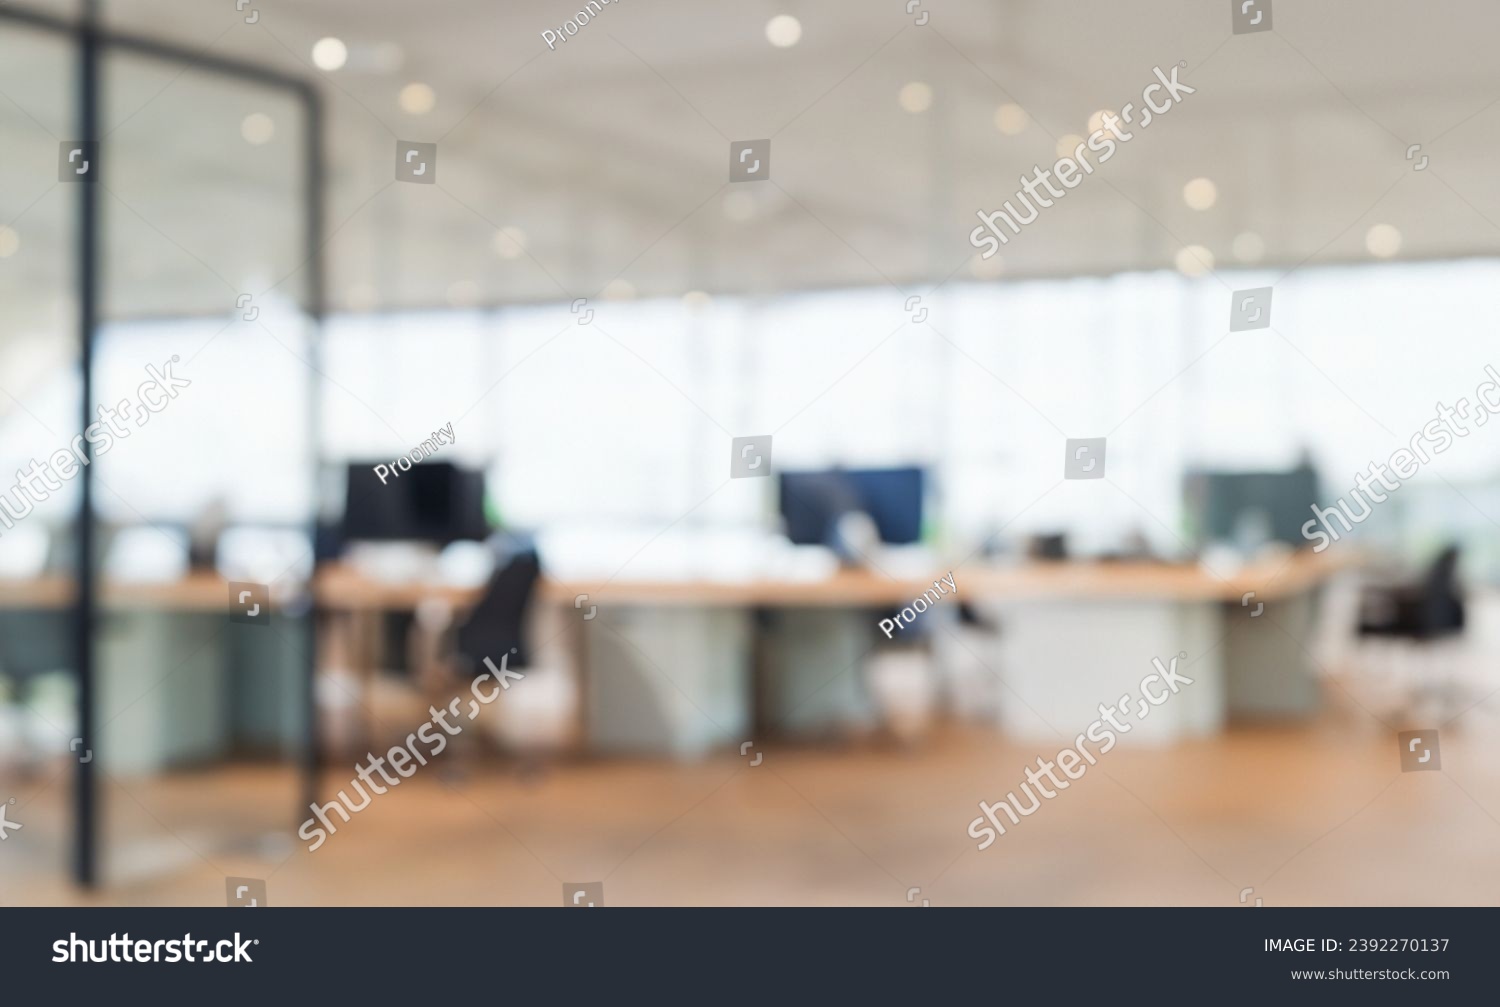 Defocused office background of a Board room with rustic wooden flooring #2392270137